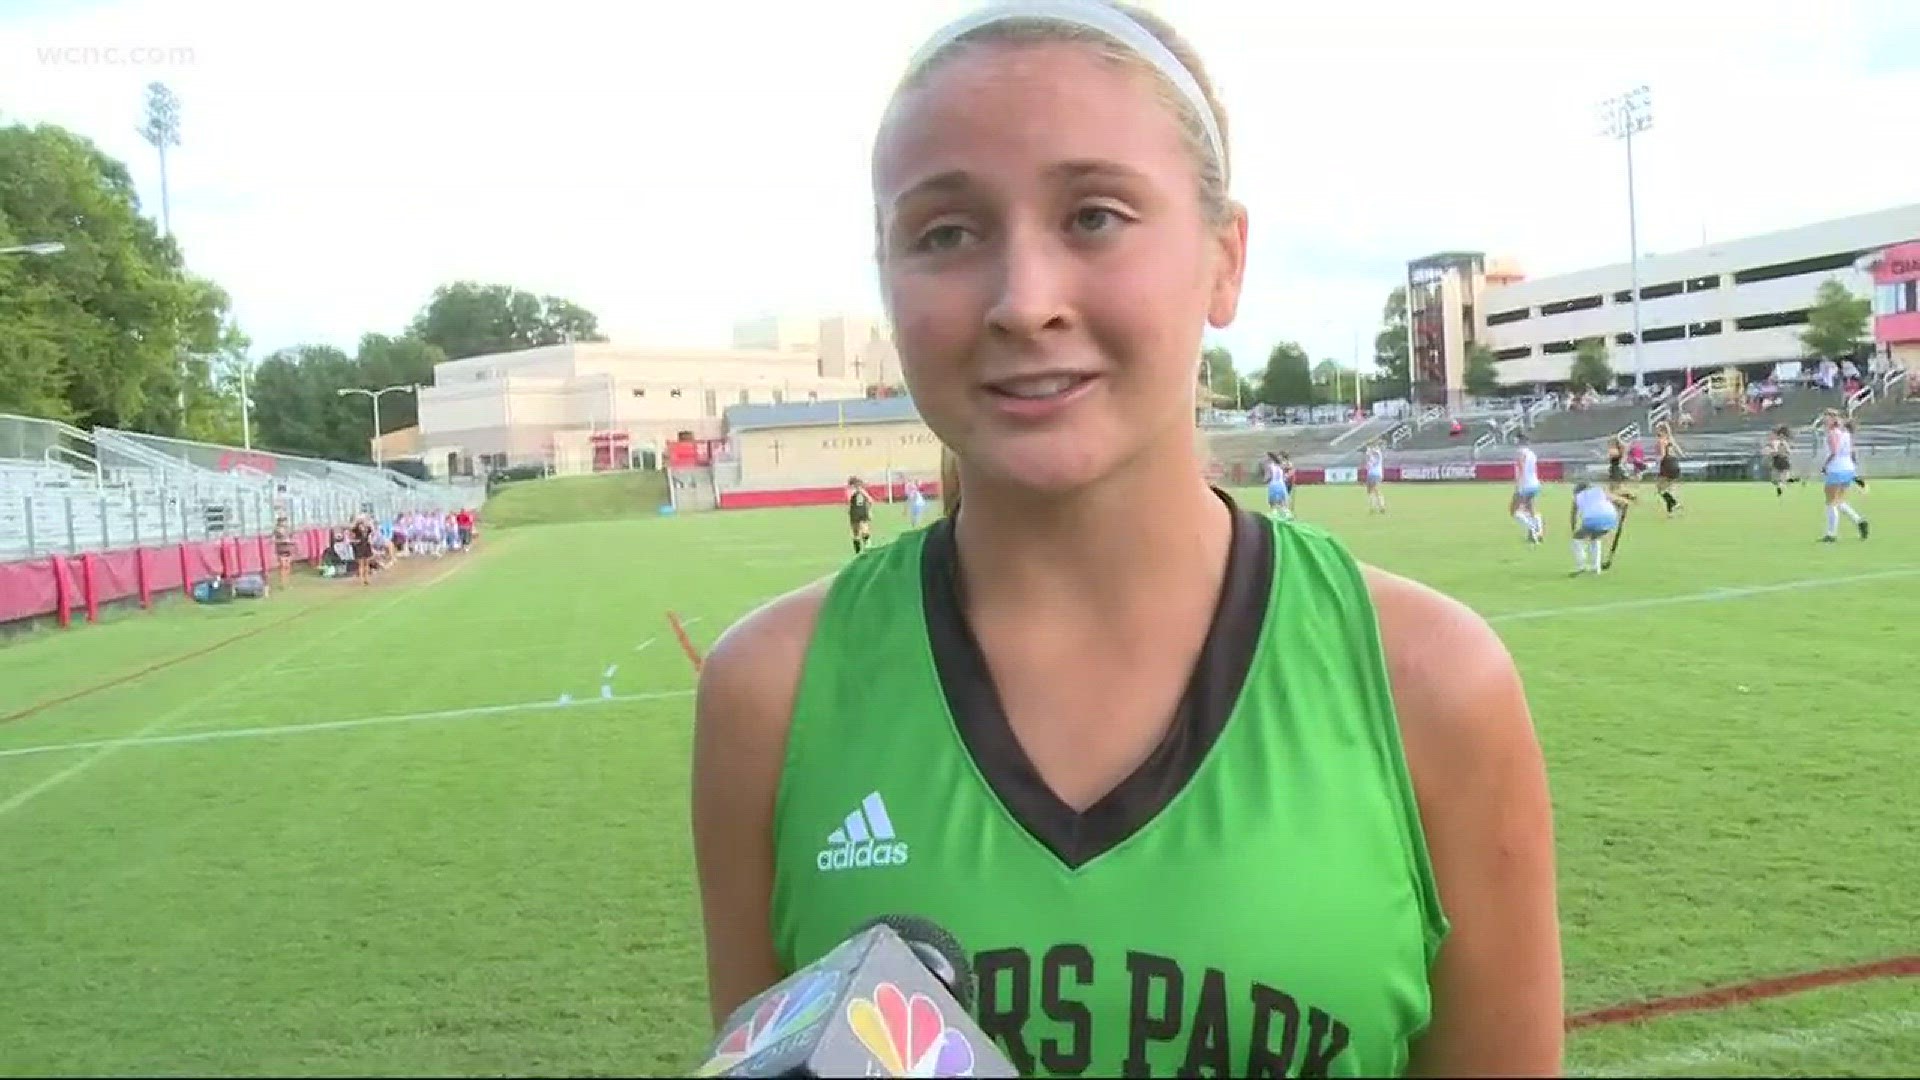 Myers Park's field hockey team is off to a blazing-fast start thanks to the team's star Megan Frost.